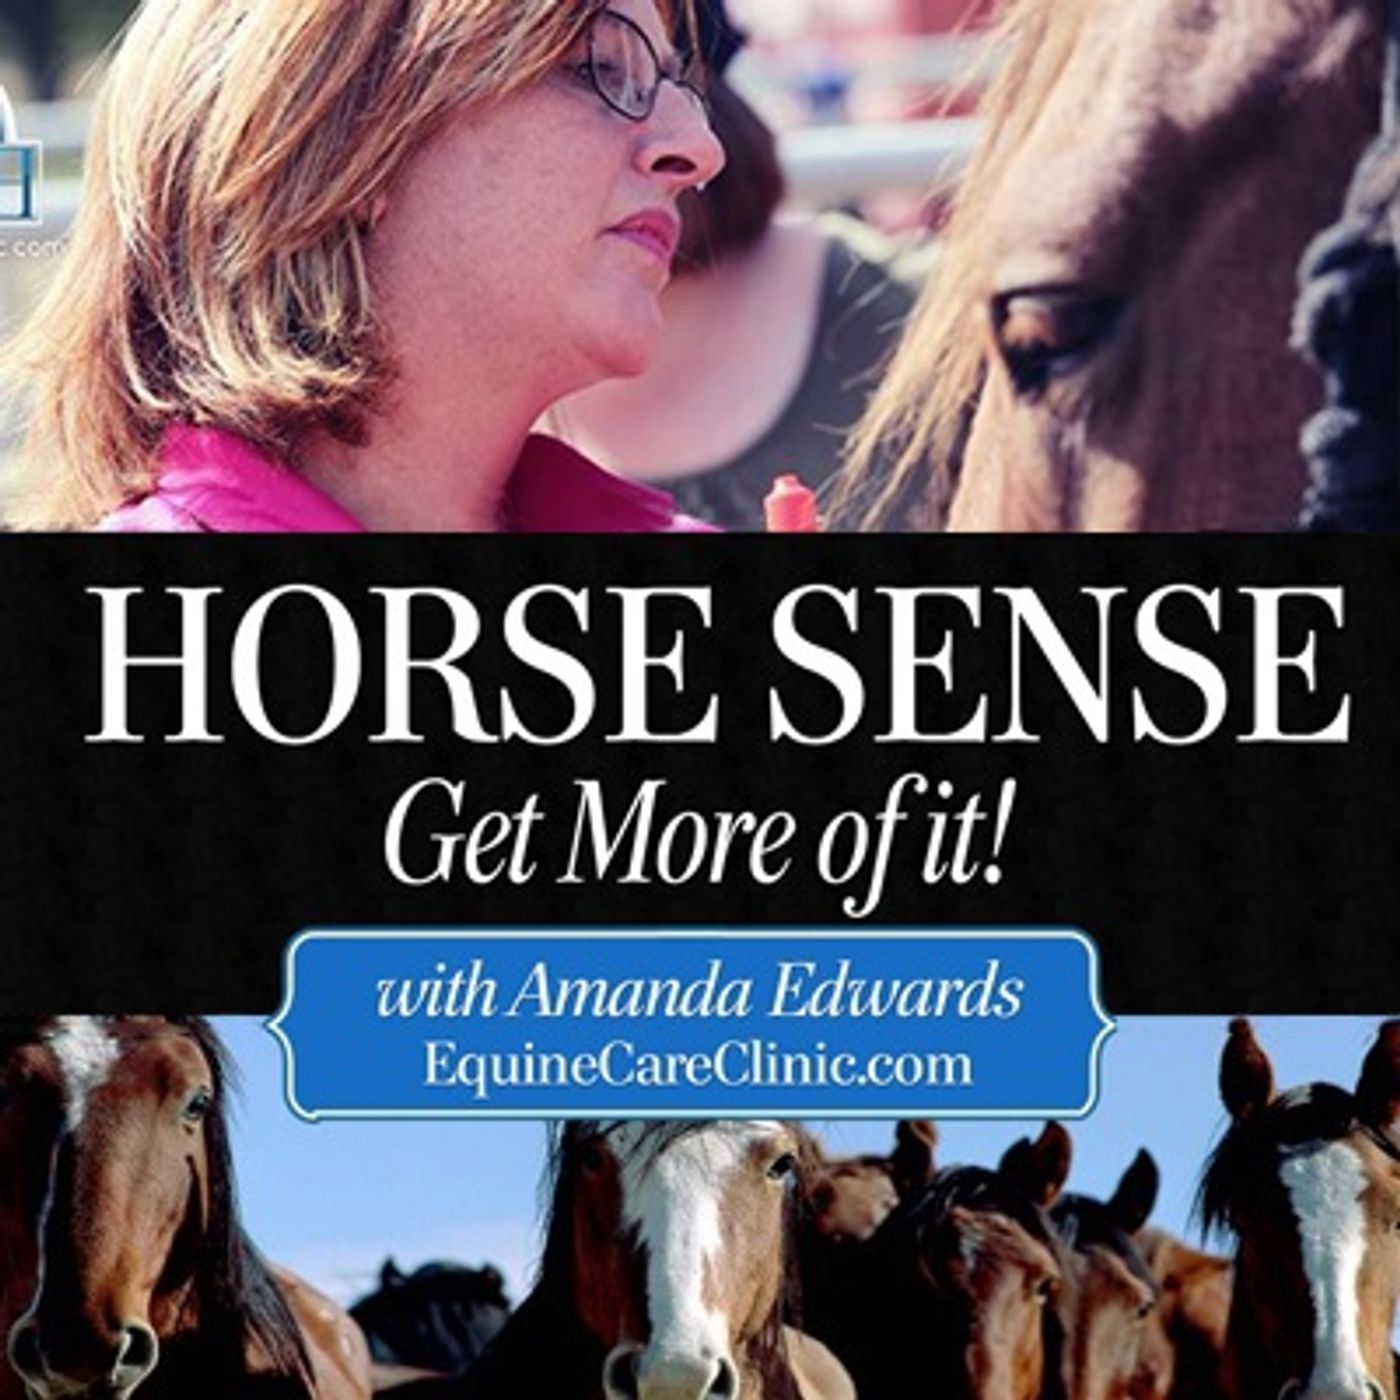 HorseSense Episode 4 - Rescuing Gili Island Ponies - Dr. Kirsten Jackson, WA Vet talks about her mission to help these hardworking ponies